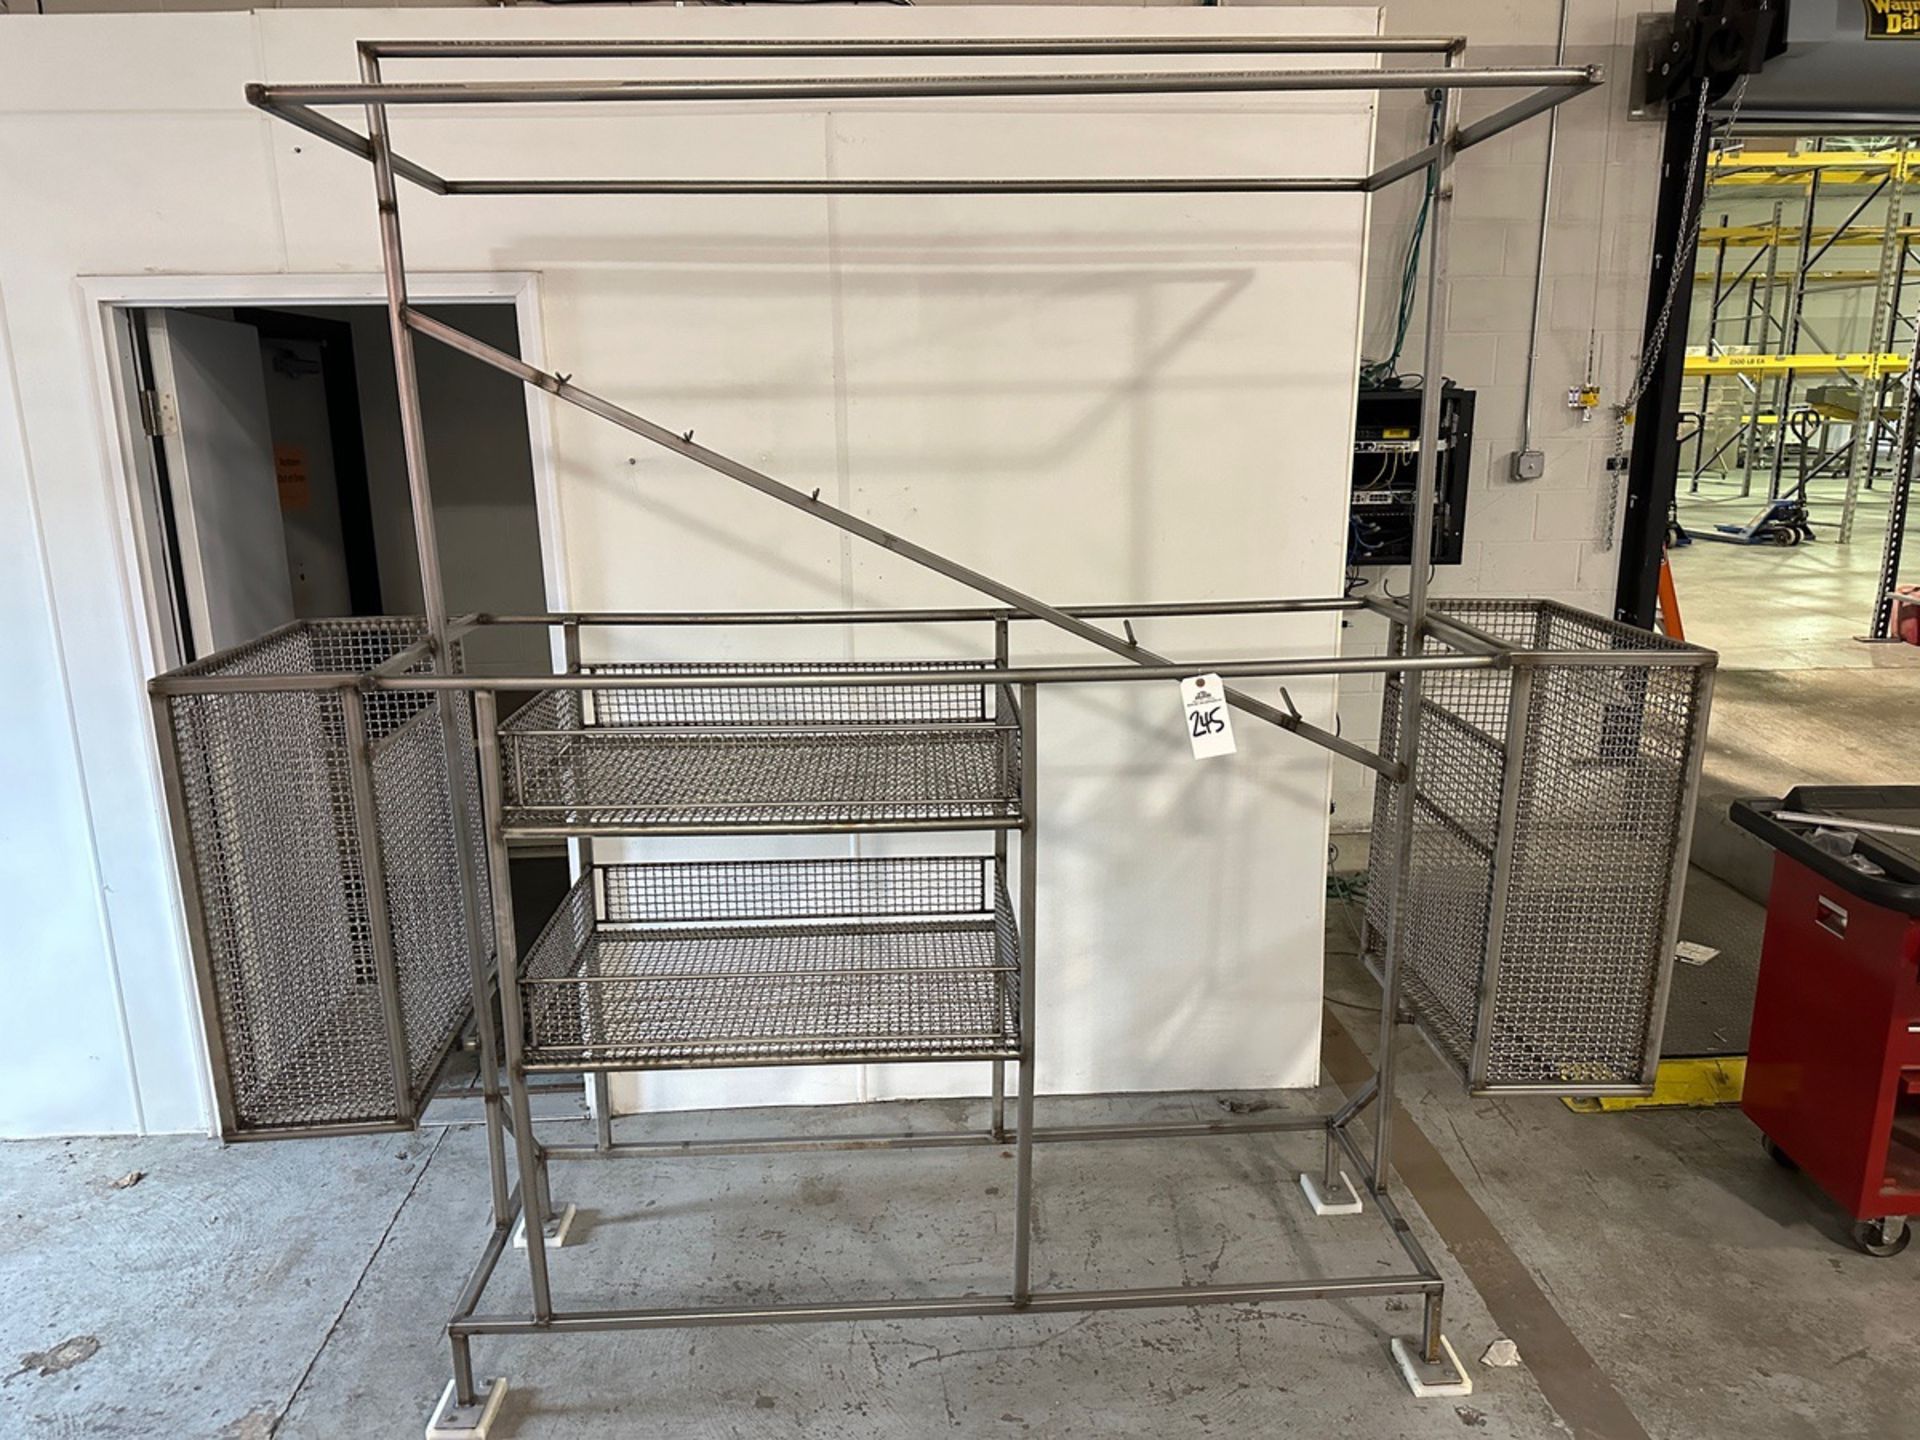 Stainless Steel Organizational Stand with Bins | Rig Fee $50